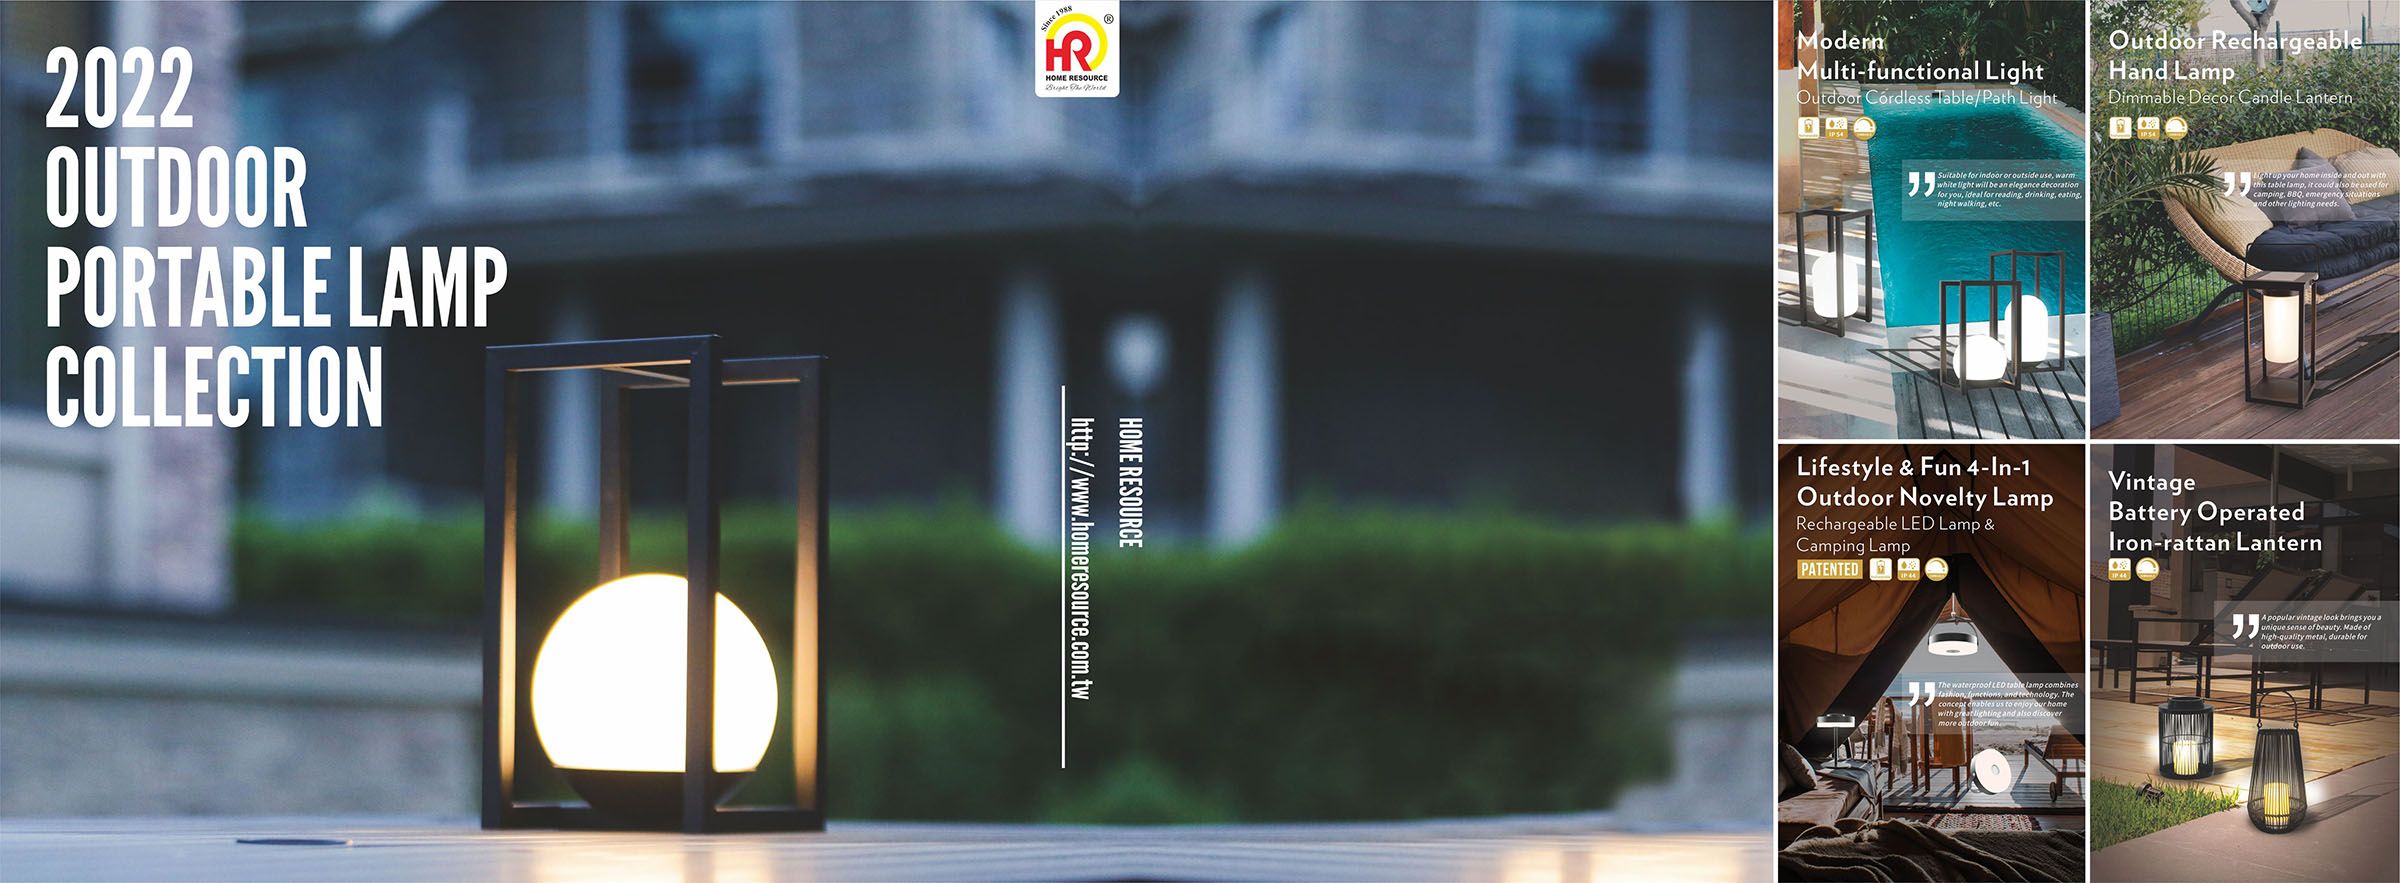 2022 Trend Alert: Portable LED Lantern Style Lighting - Indoor and Outdoor Portable Lighting